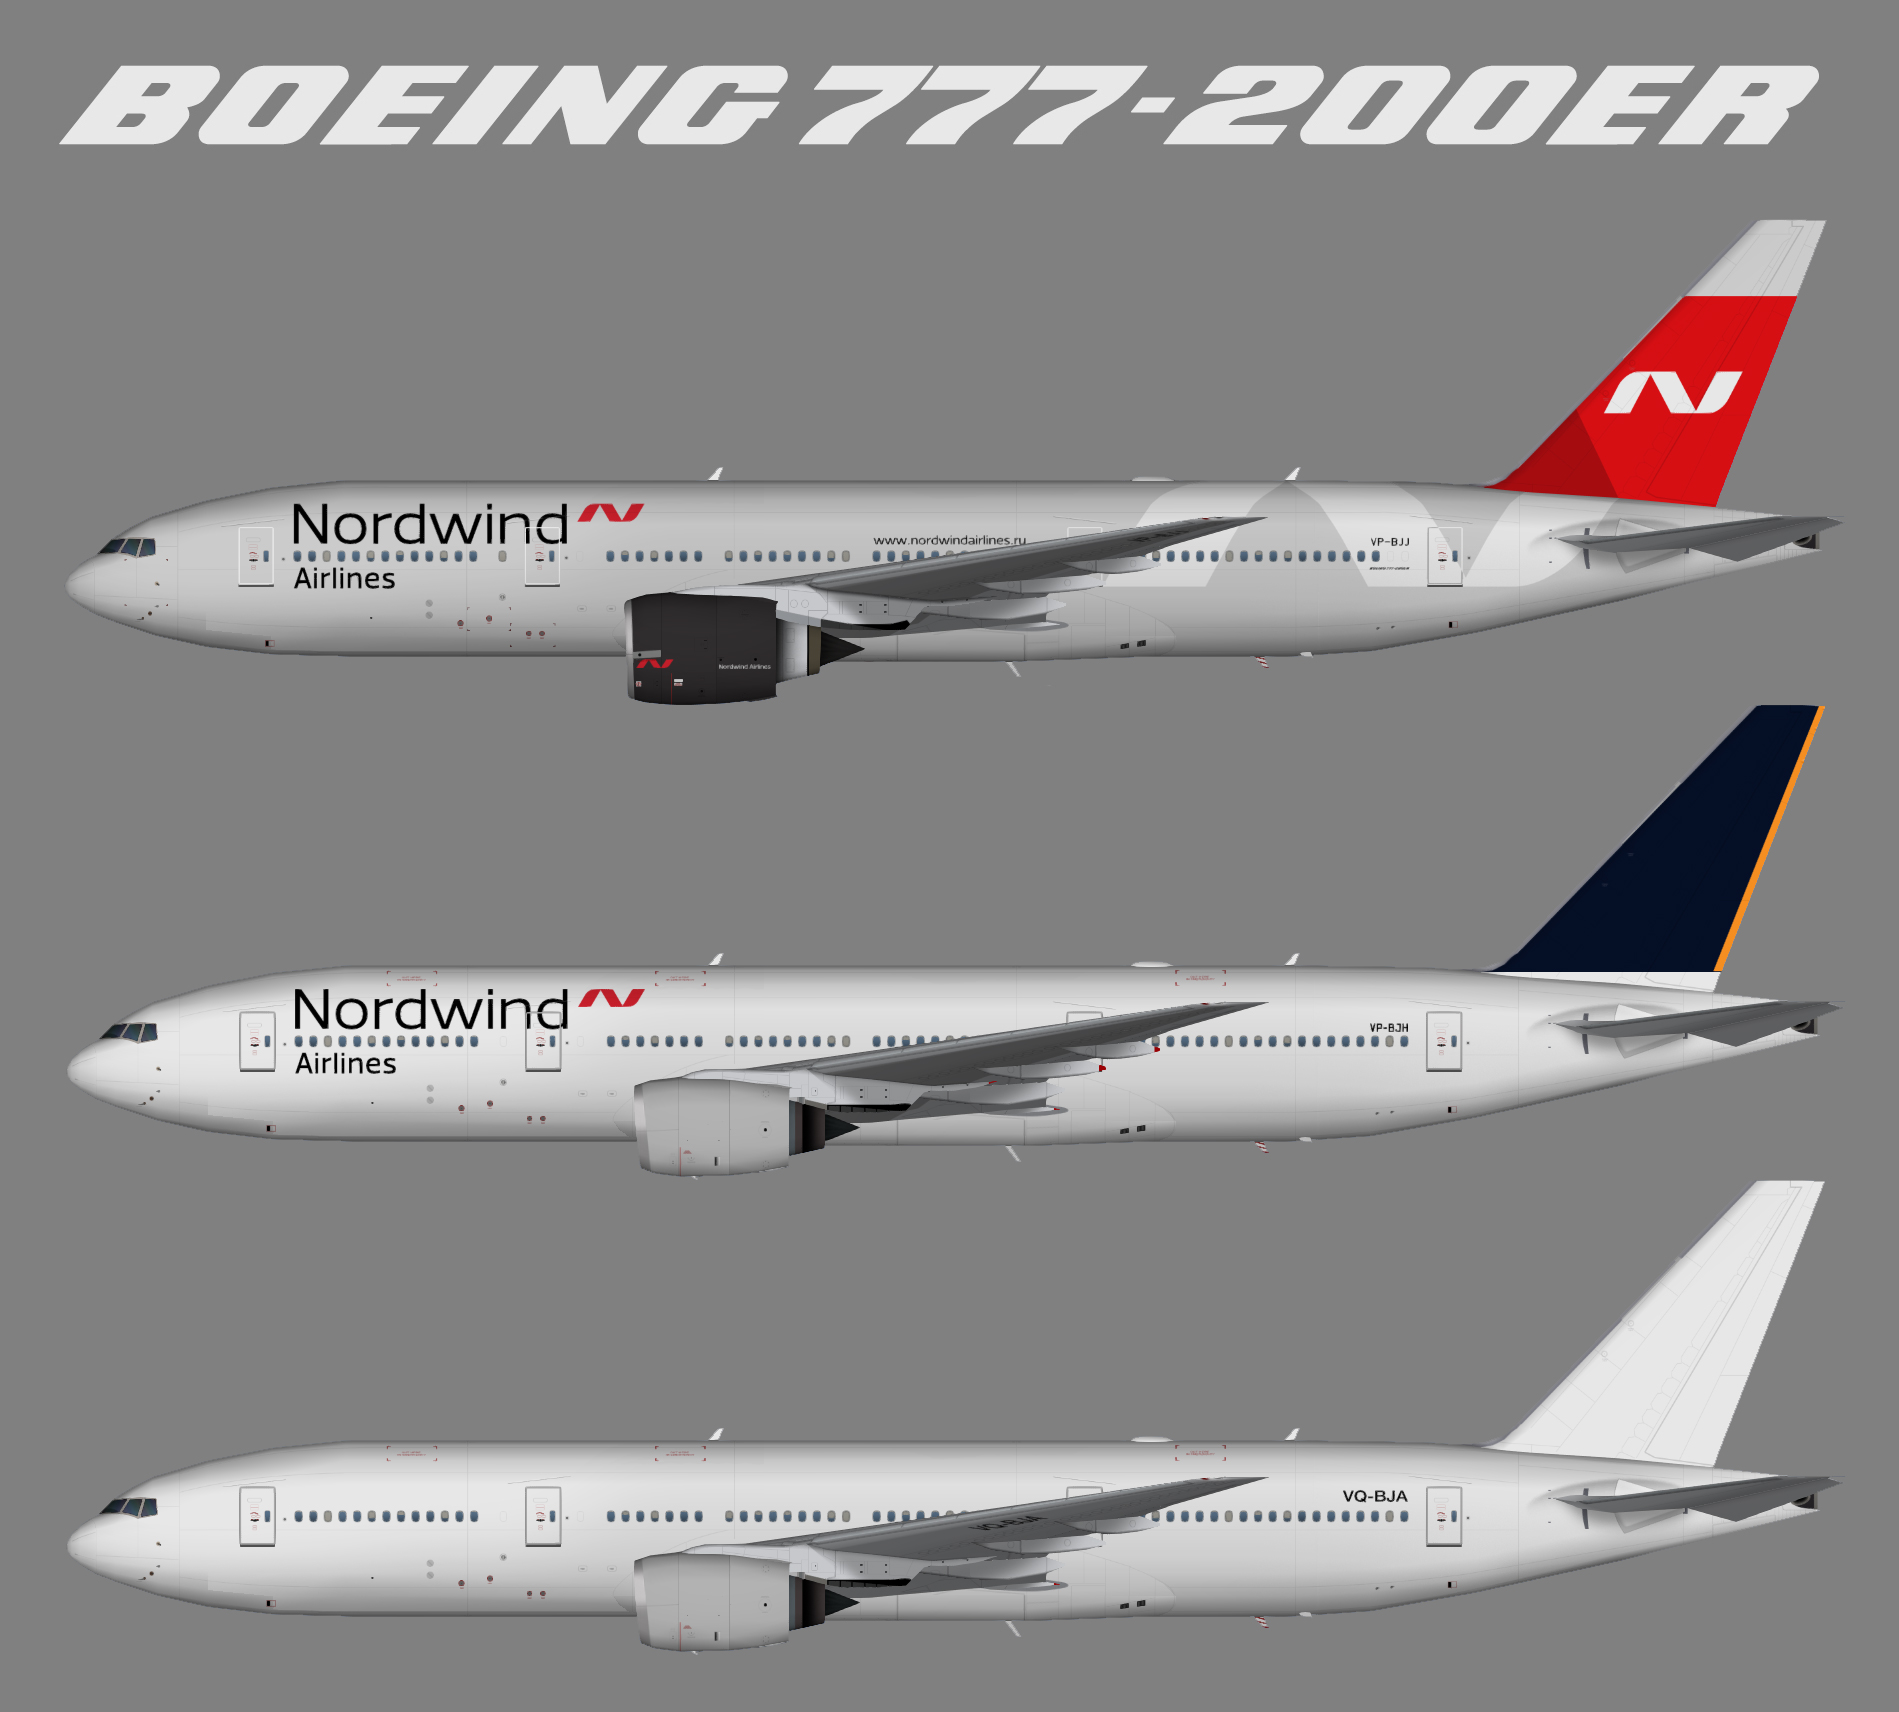 Southwind boeing 777. Boeing 777 Nordwind Airlines. 777-300er Норд Винд. Боинг 777 300 er Норд Винд. Боинг 777 200 er Норд Винд.